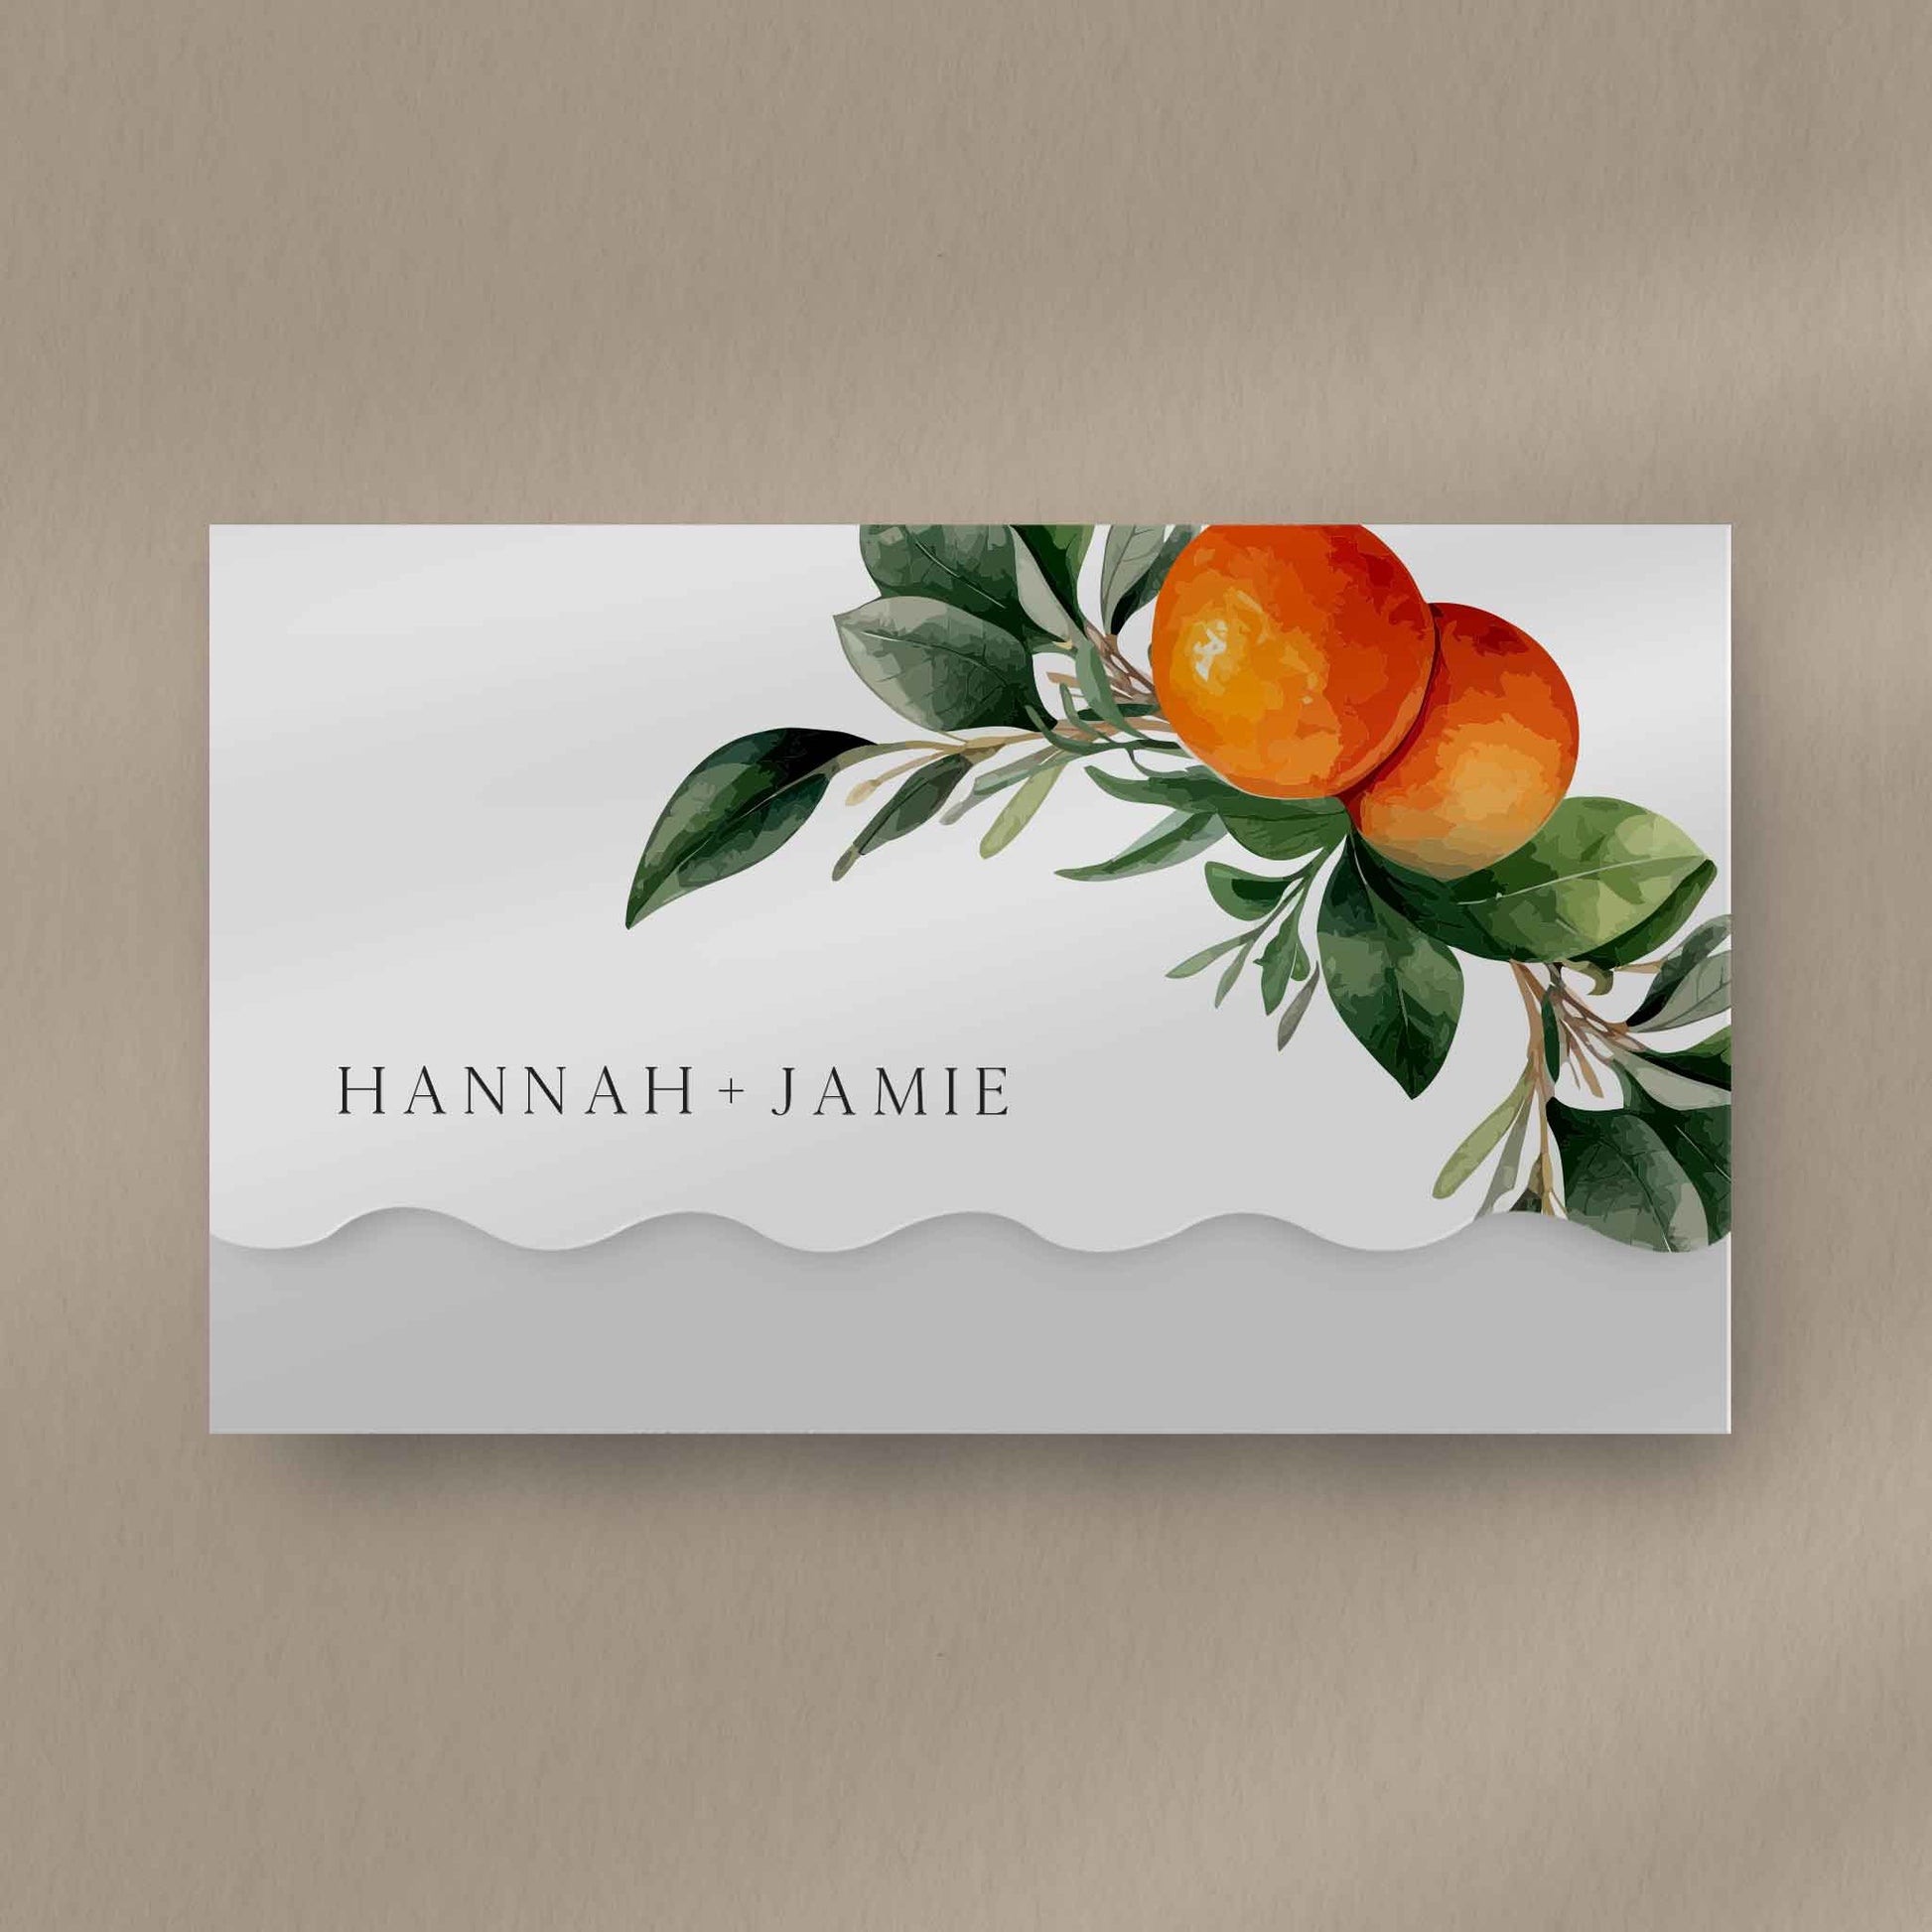 Hannah Scallop Envelope Invite  Ivy and Gold Wedding Stationery   